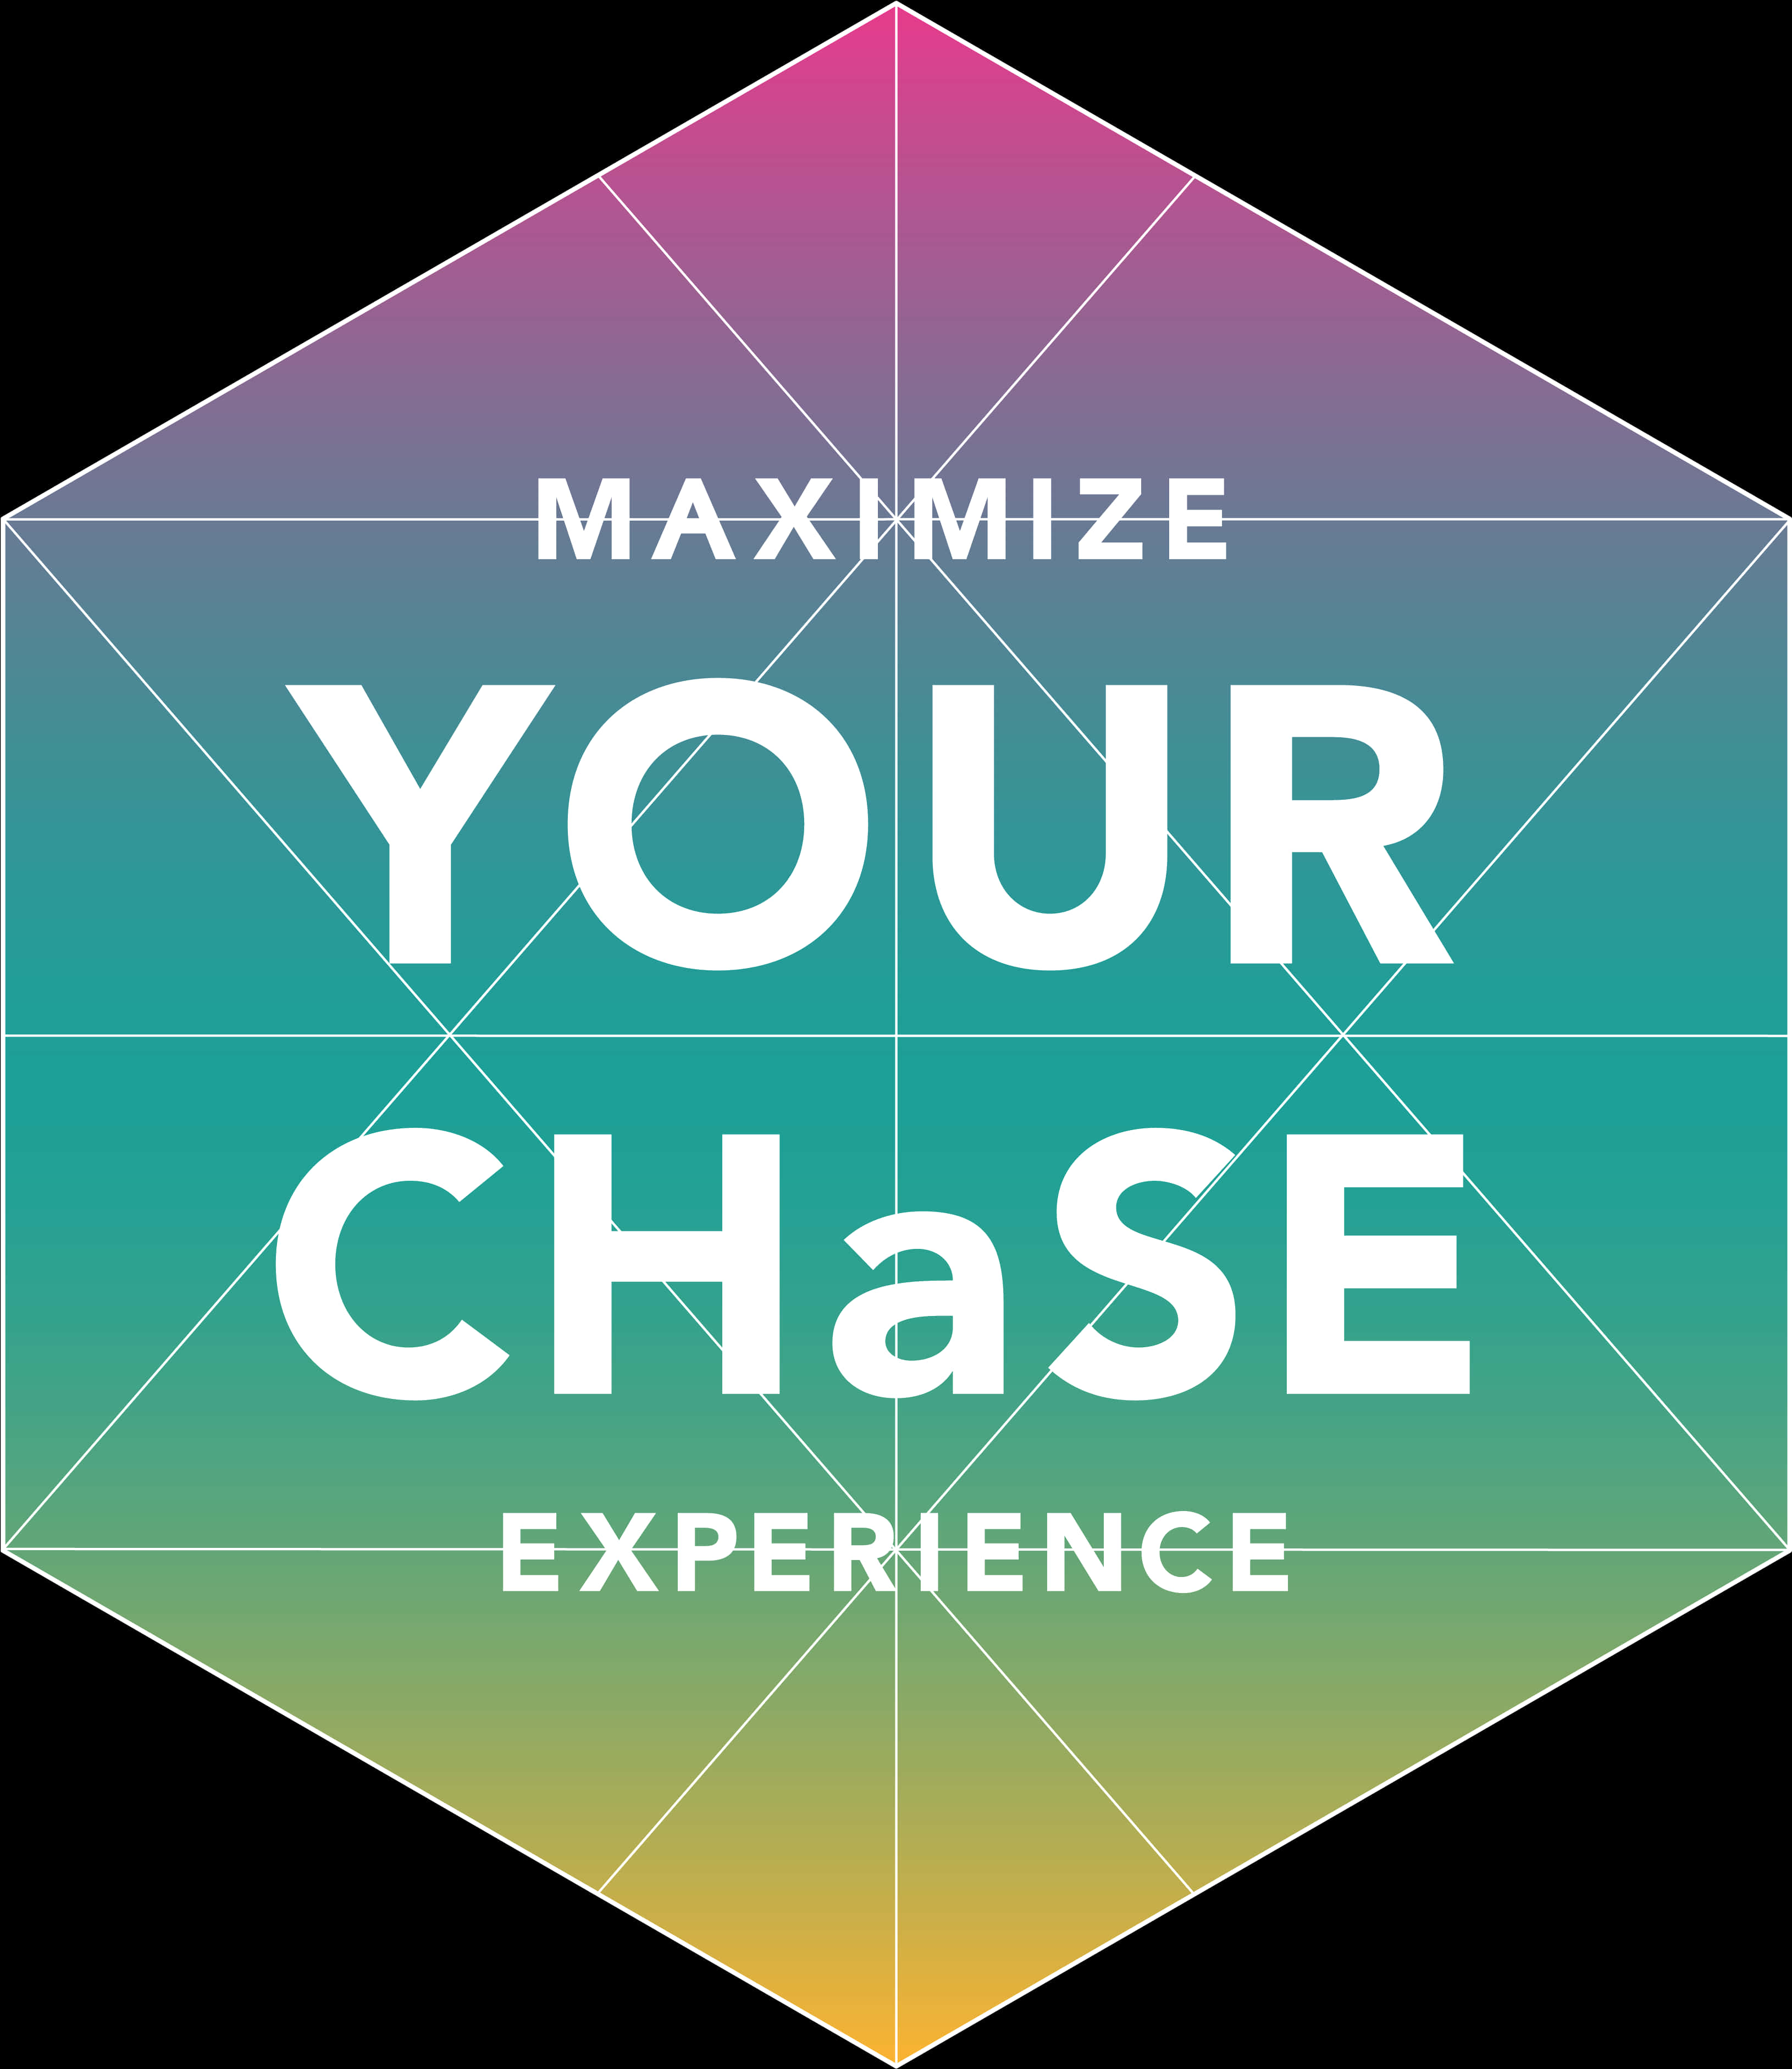 Maximize Your Chase Experience Graphic